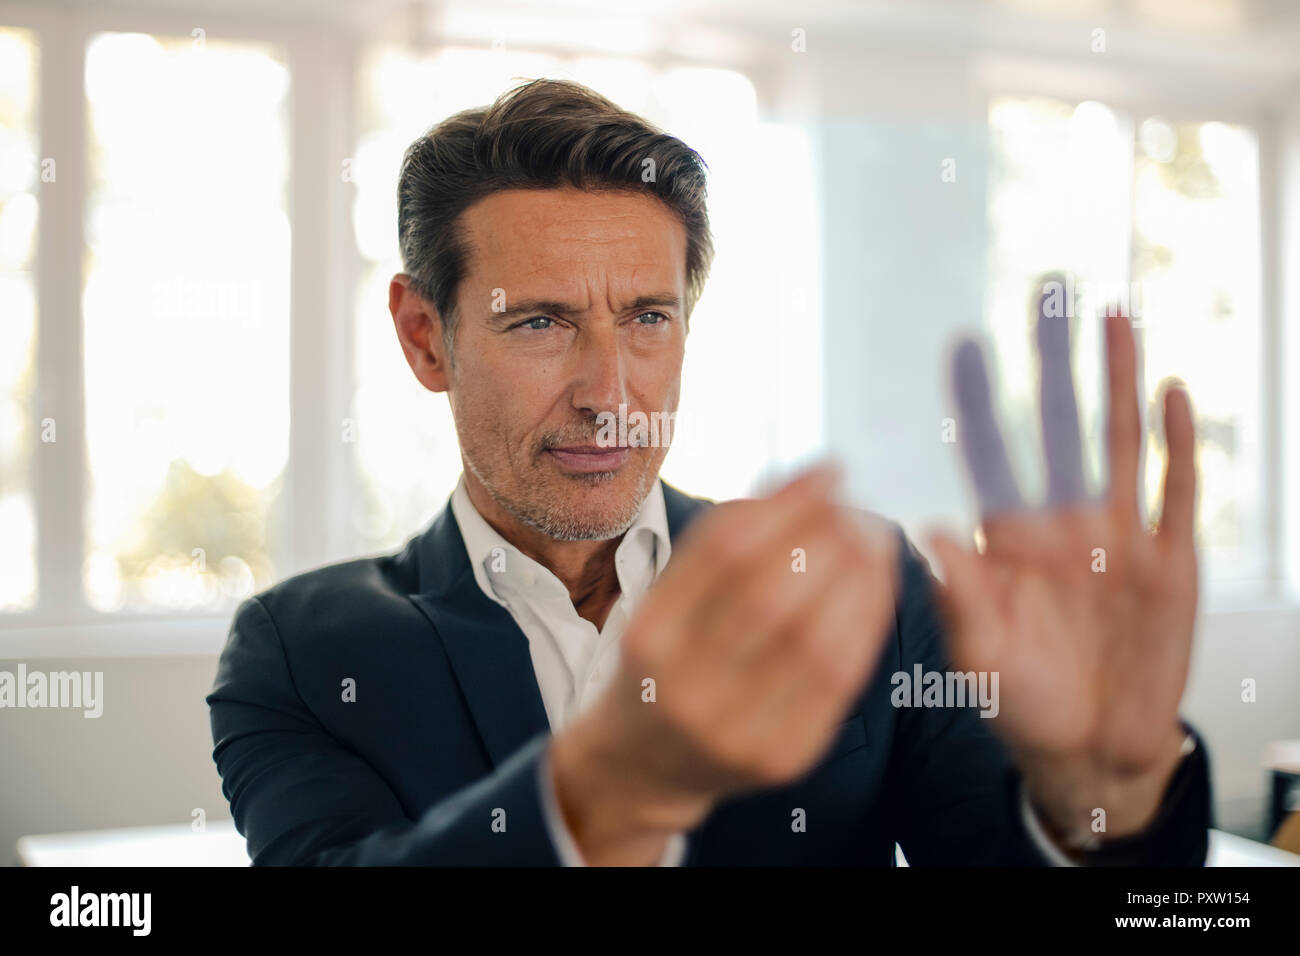 Businessman using futuristic touch screen Banque D'Images